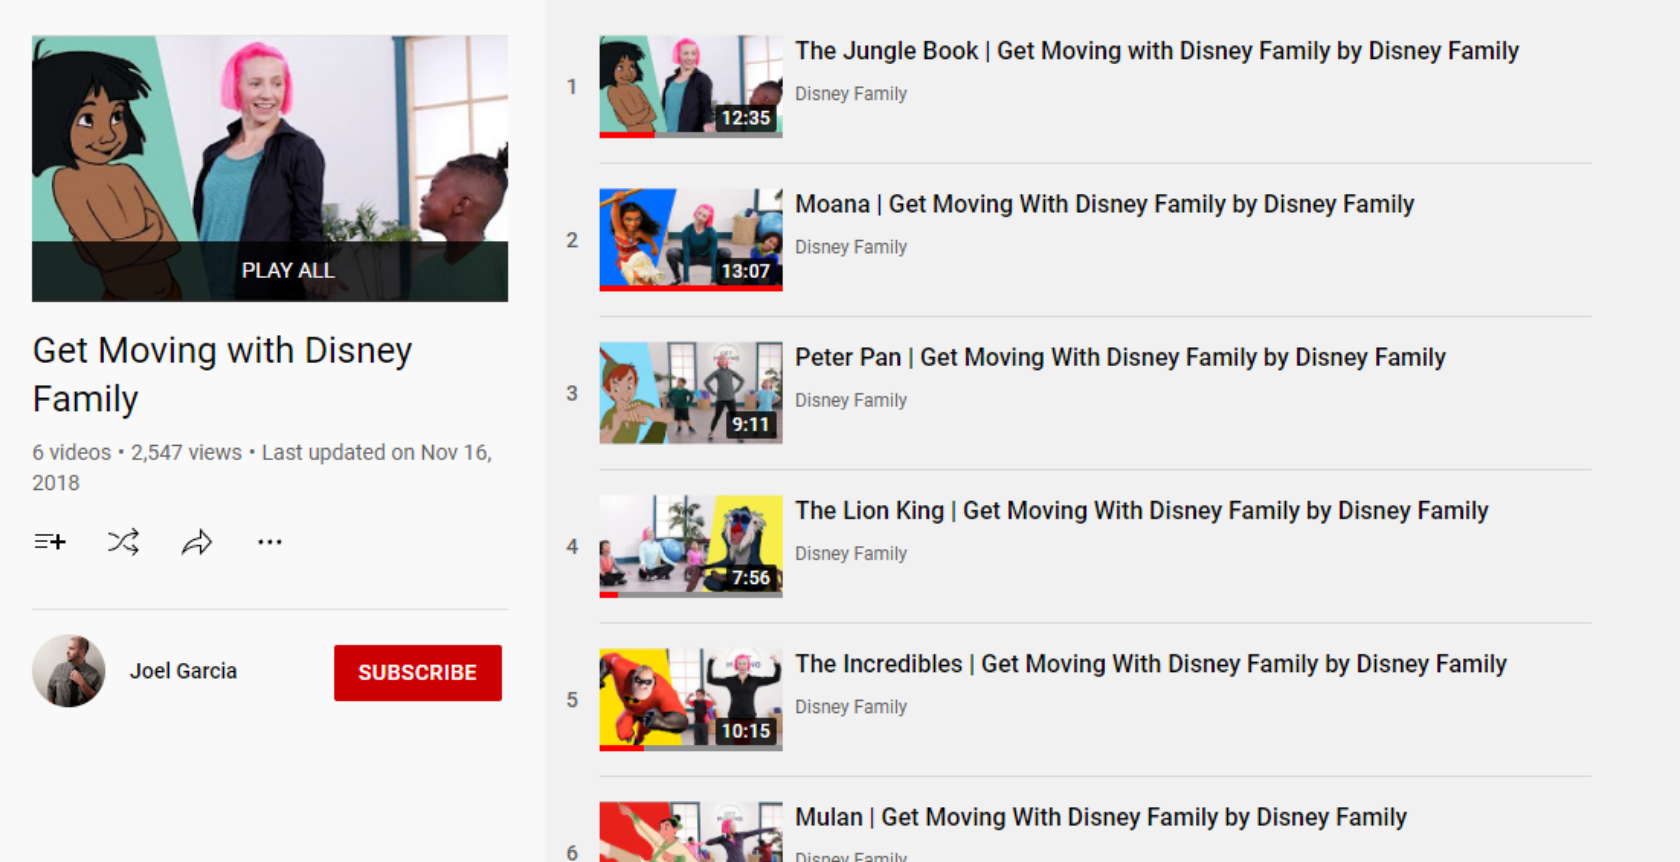 Get Moving with Disney Channel workout videos